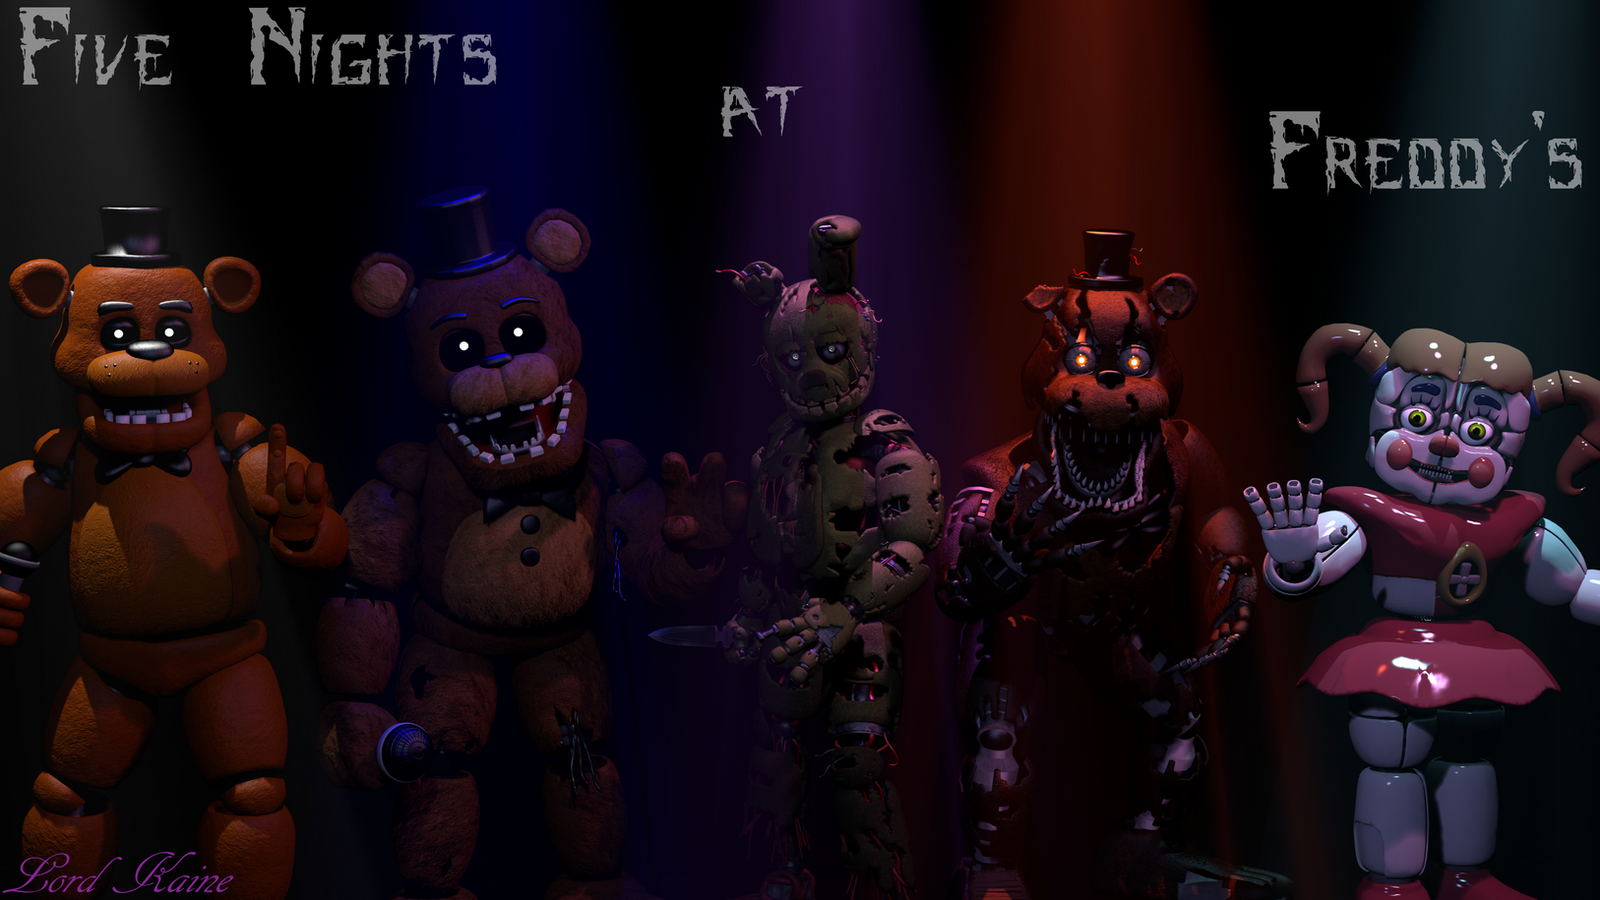 FIVE NIGHTS AT FREDDY'S free online game on